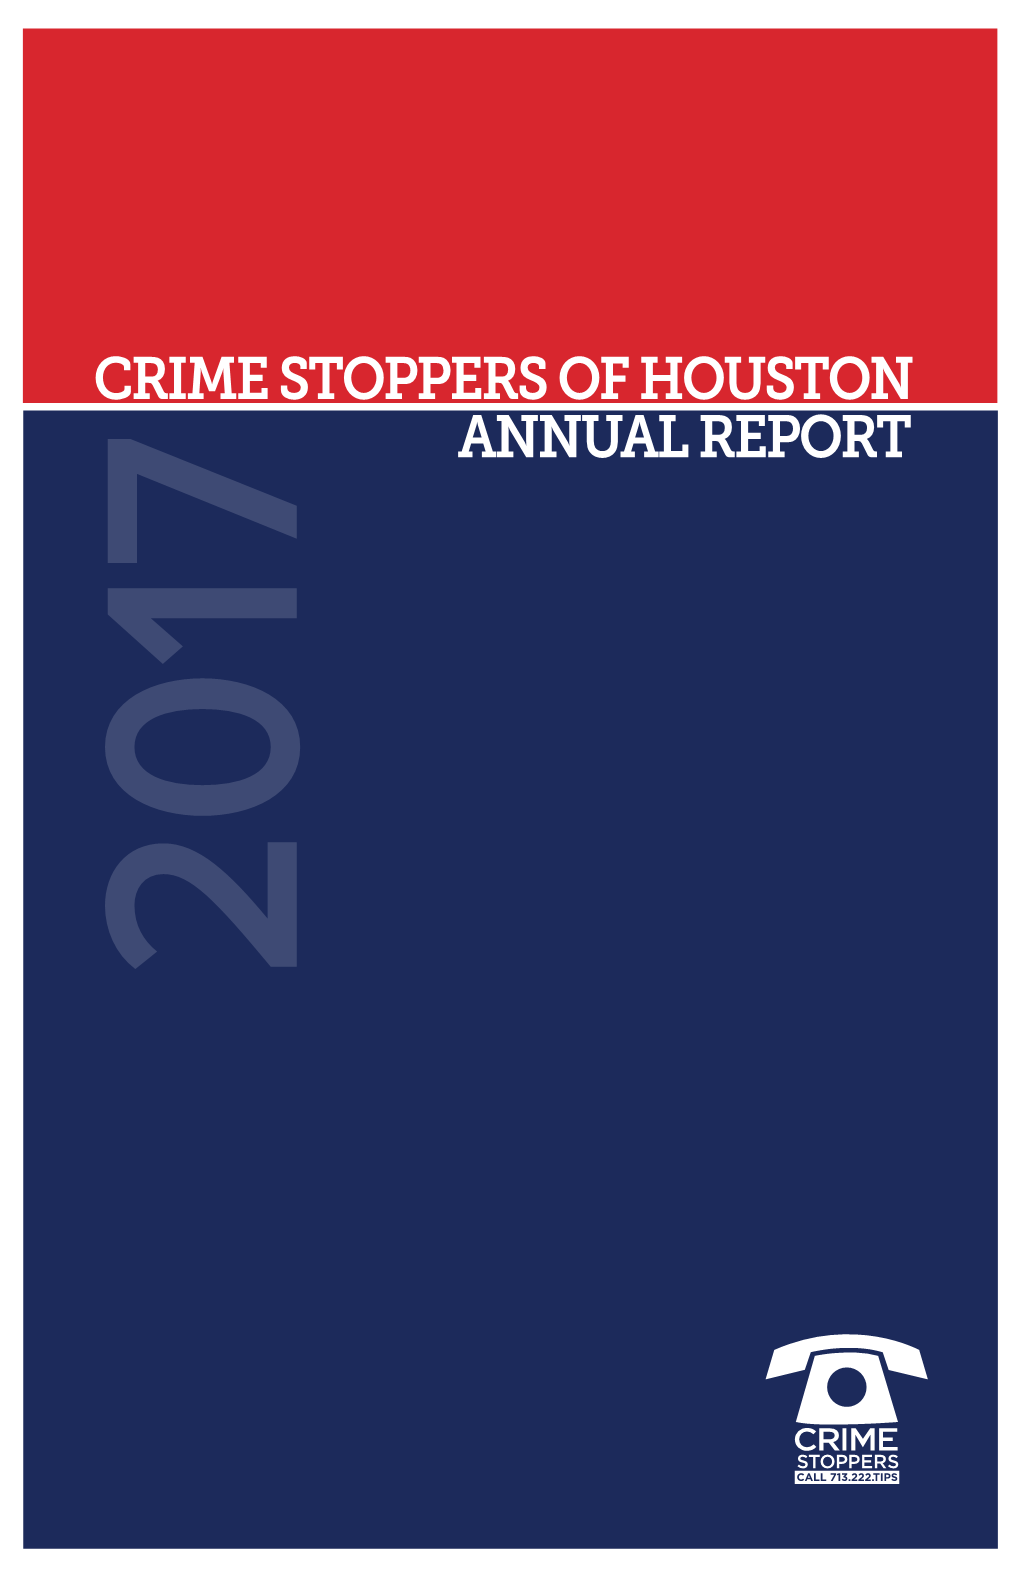 Crime Stoppers of Houston Annual Report 2017